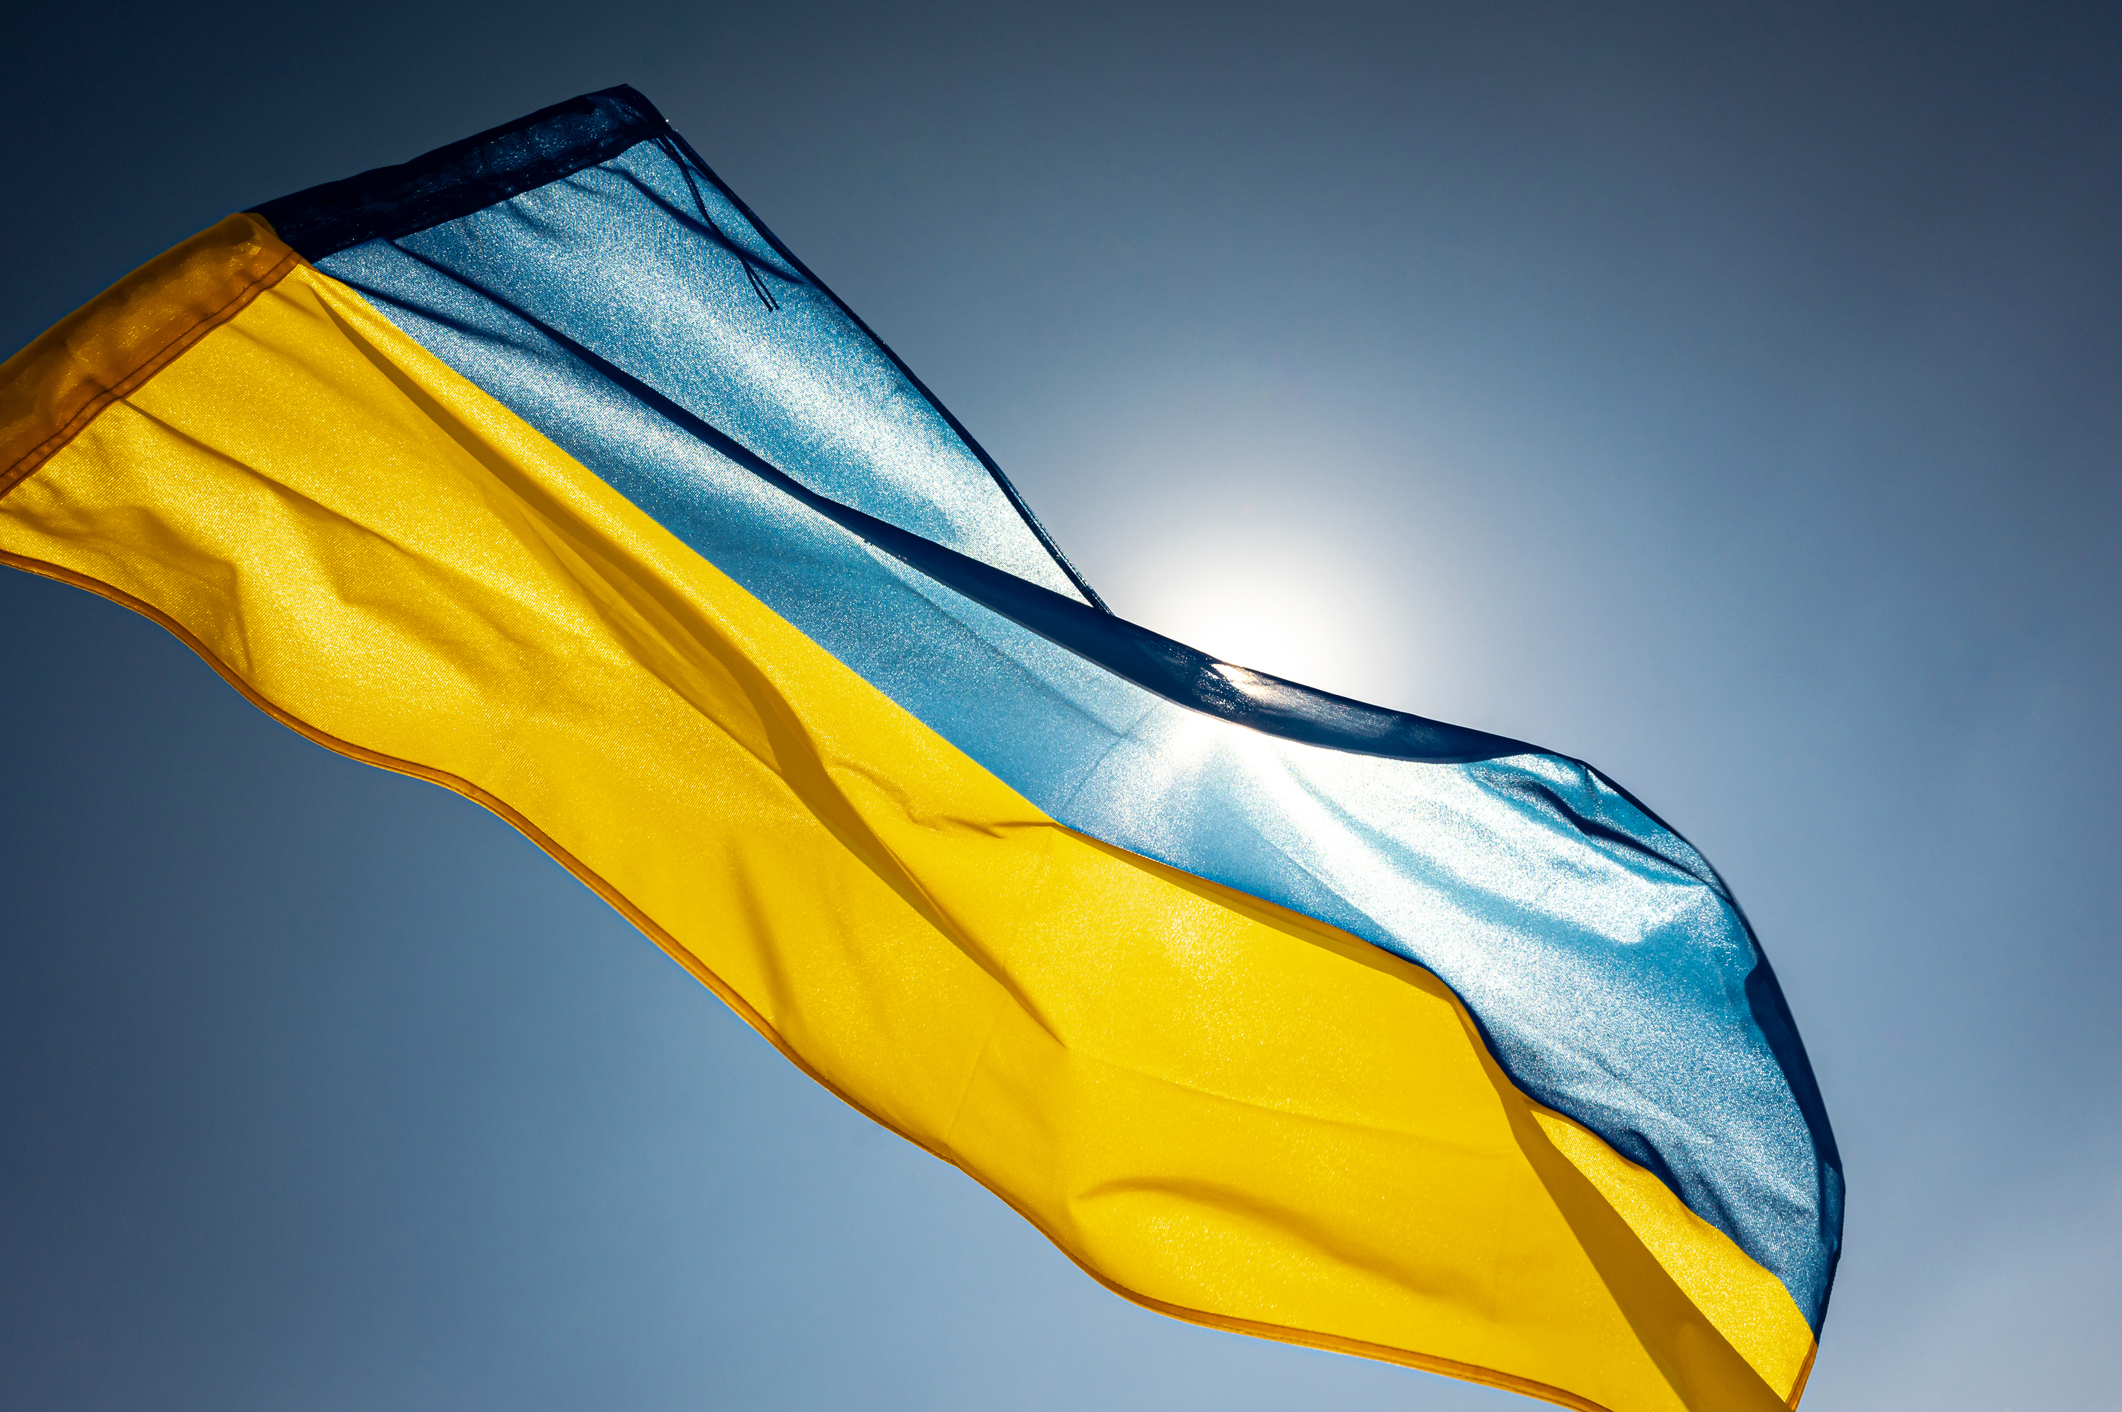 How to wish someone a Happy Ukraine Independence Day in Ukrainian